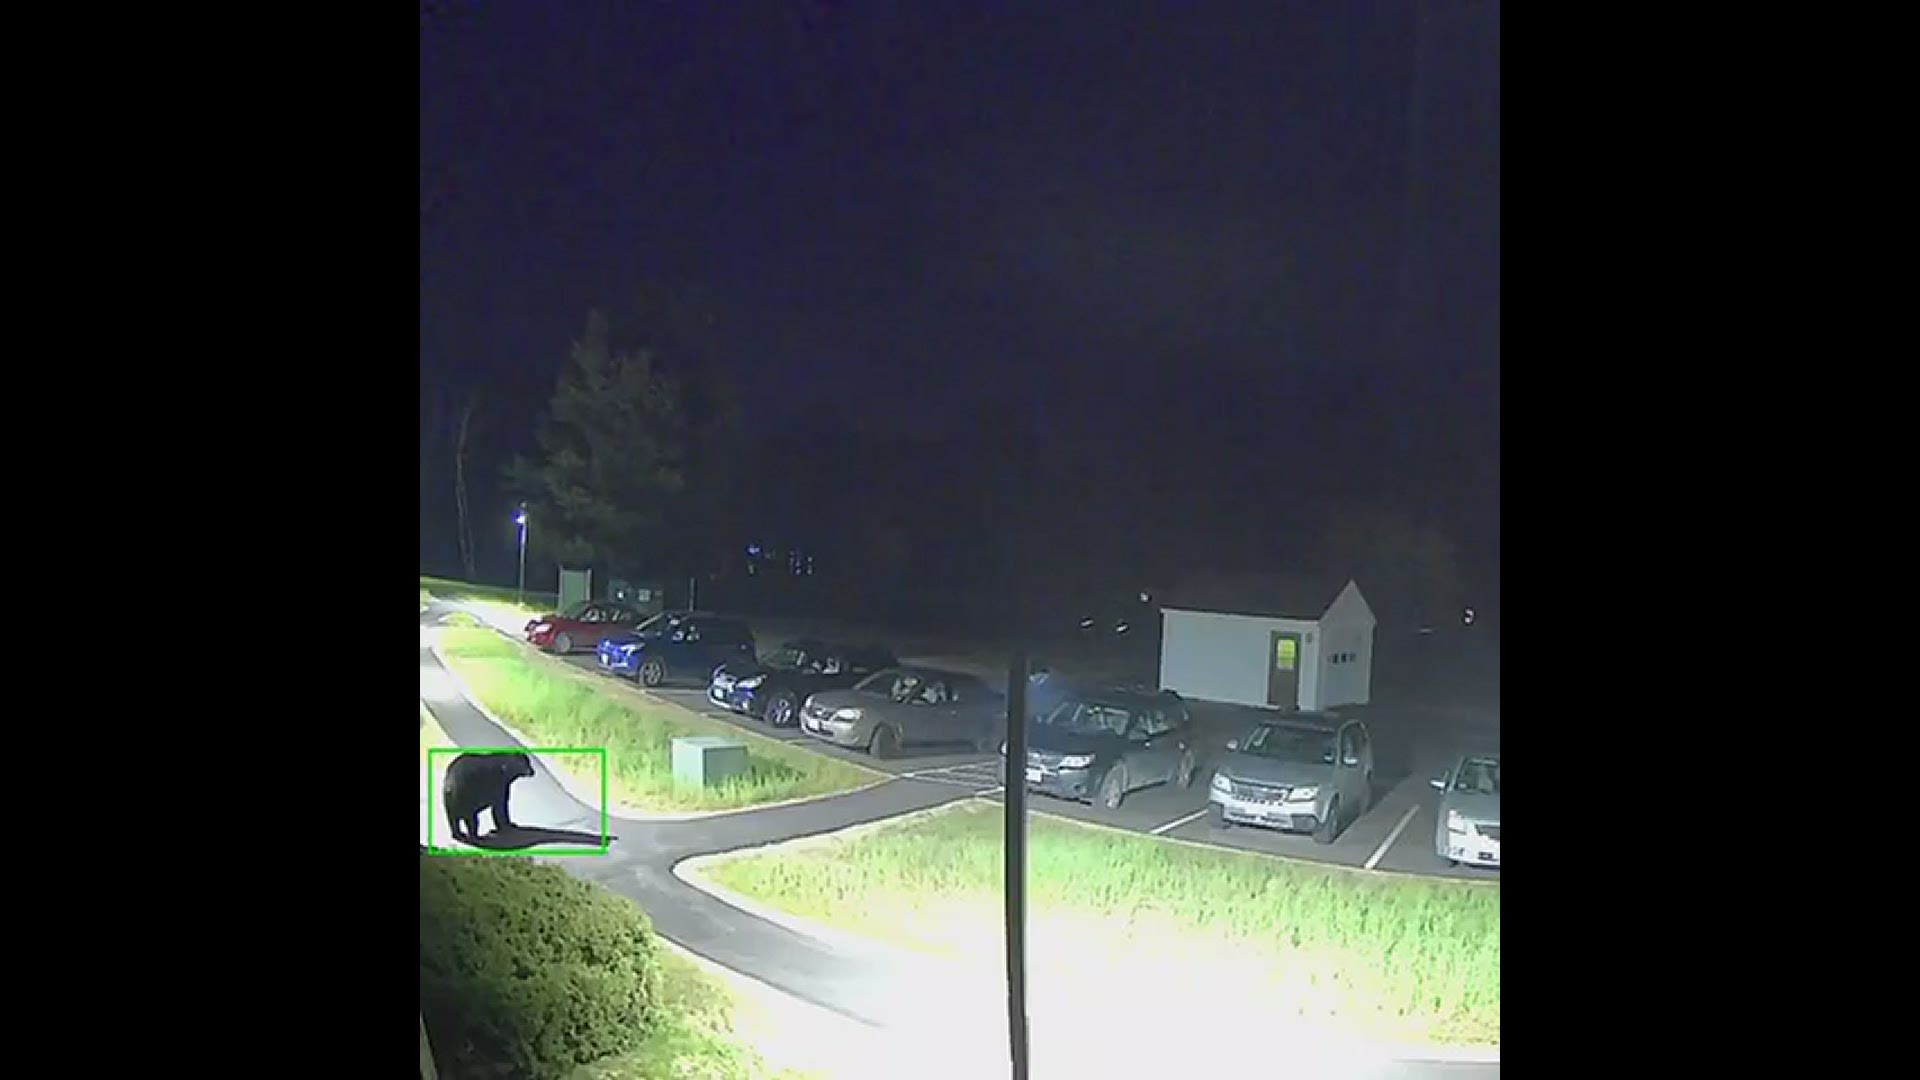 We have a lot of bear activity here in Fryeburg Maine after 9 pm
Credit: Kyle Soares